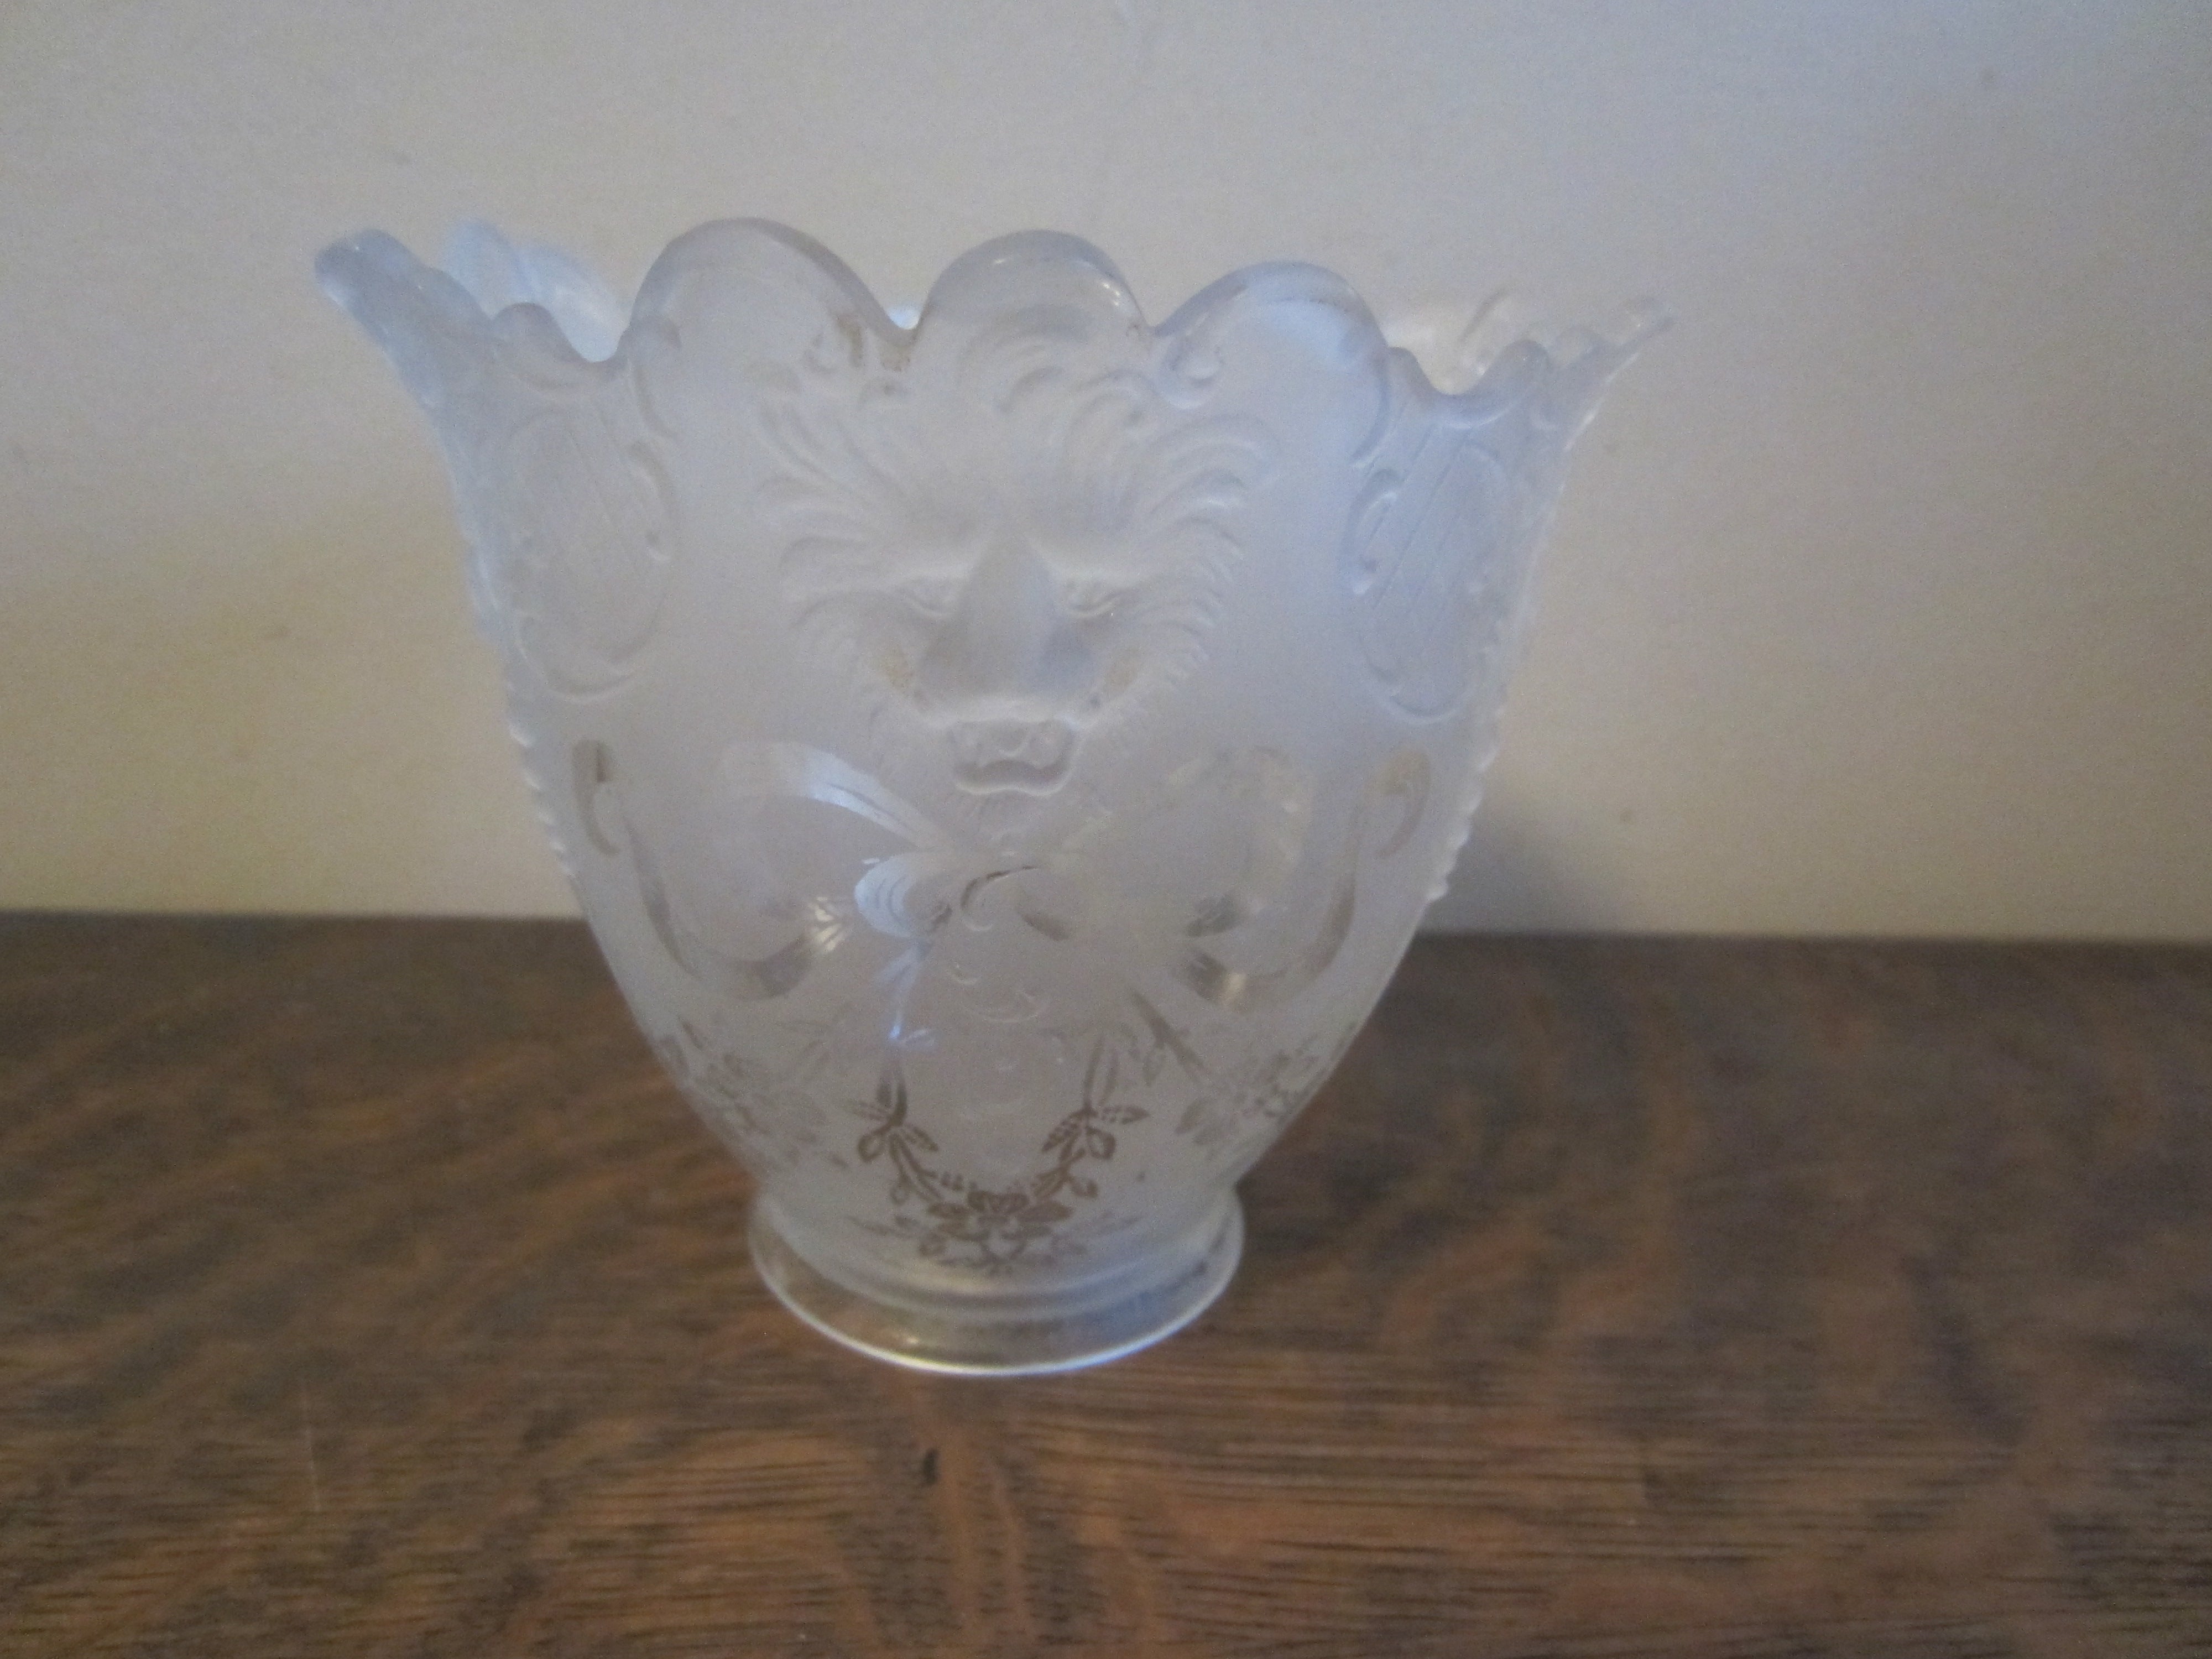 Small Frosted Antique Shade with Flowers, Ribbons and Lions